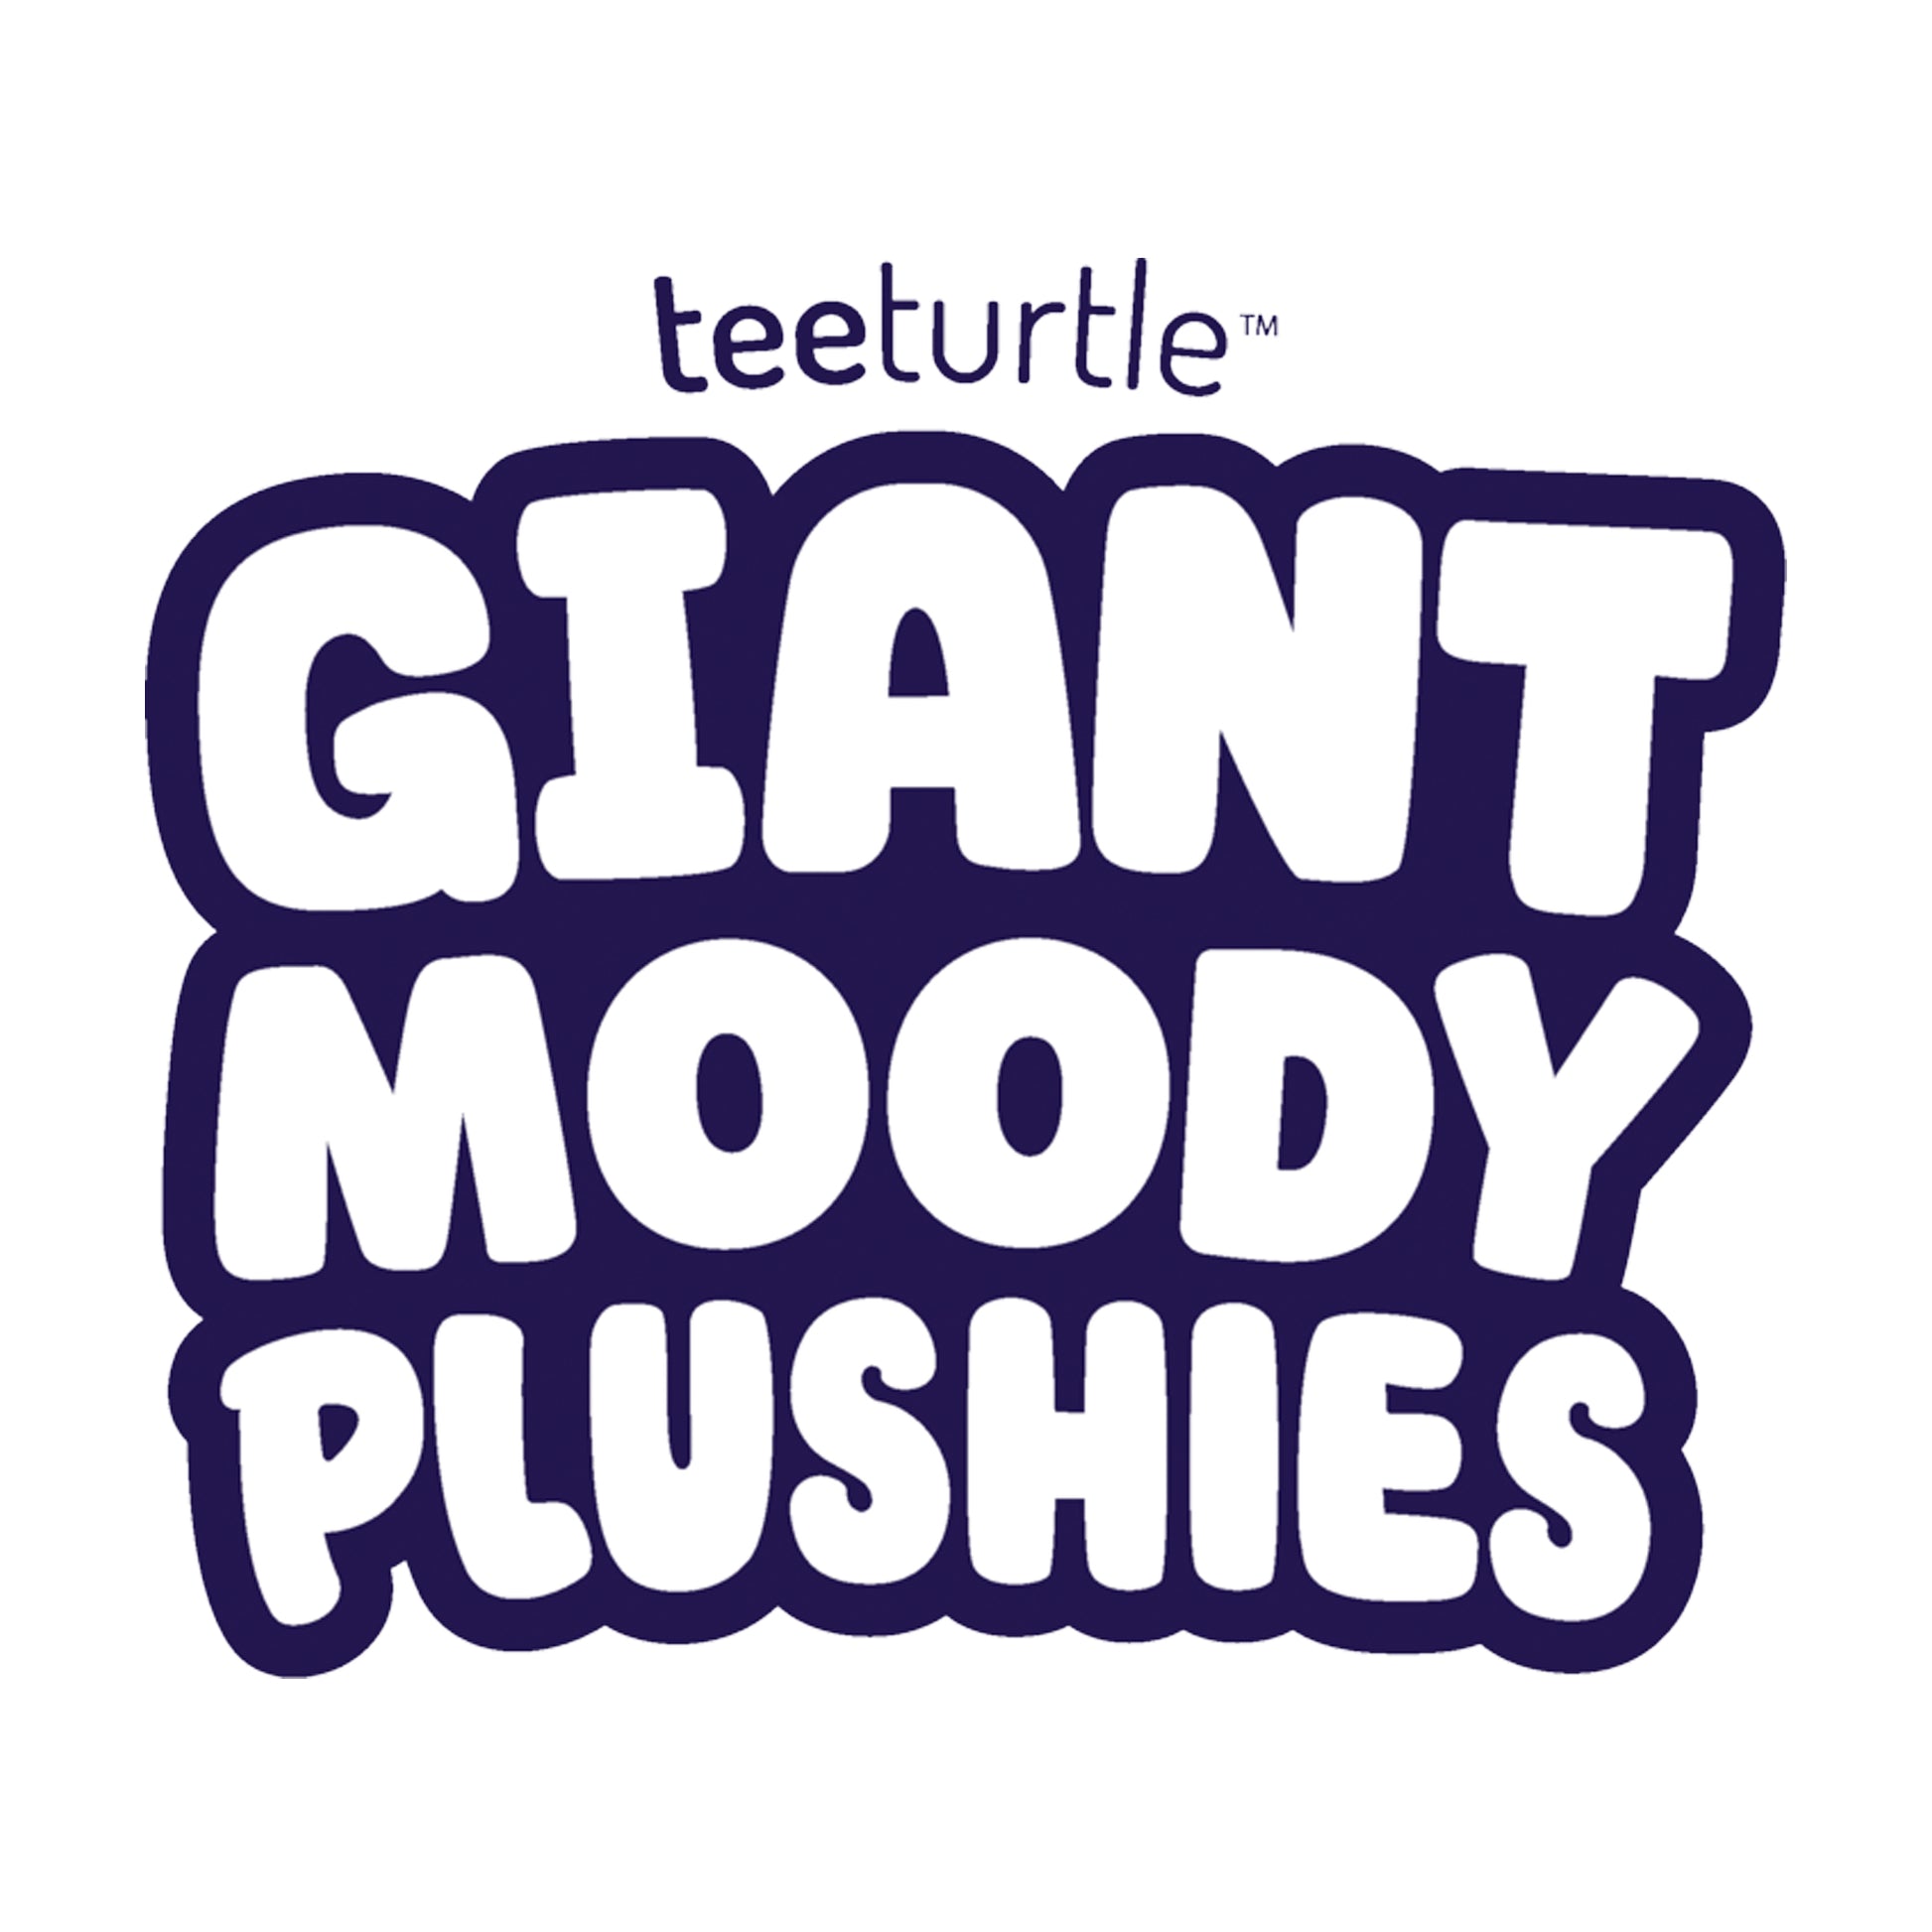 TeeTurtle's Giant Moody Kittencorn Plushies are perfect for cuddling and decorating.